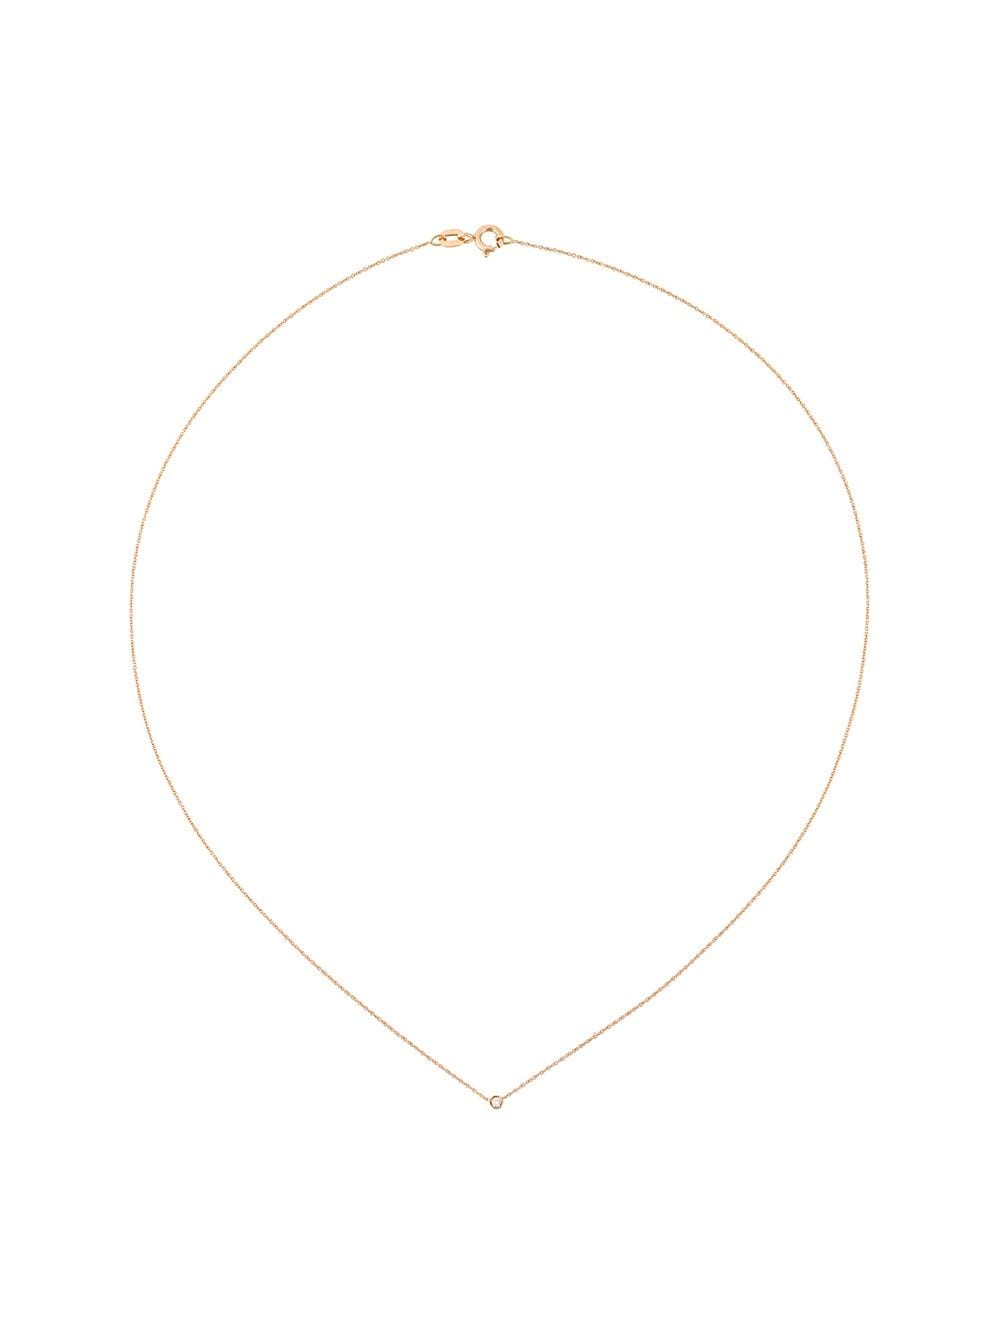 Wouters & Hendrix Gold Single Champagne Diamond Necklace In Pink